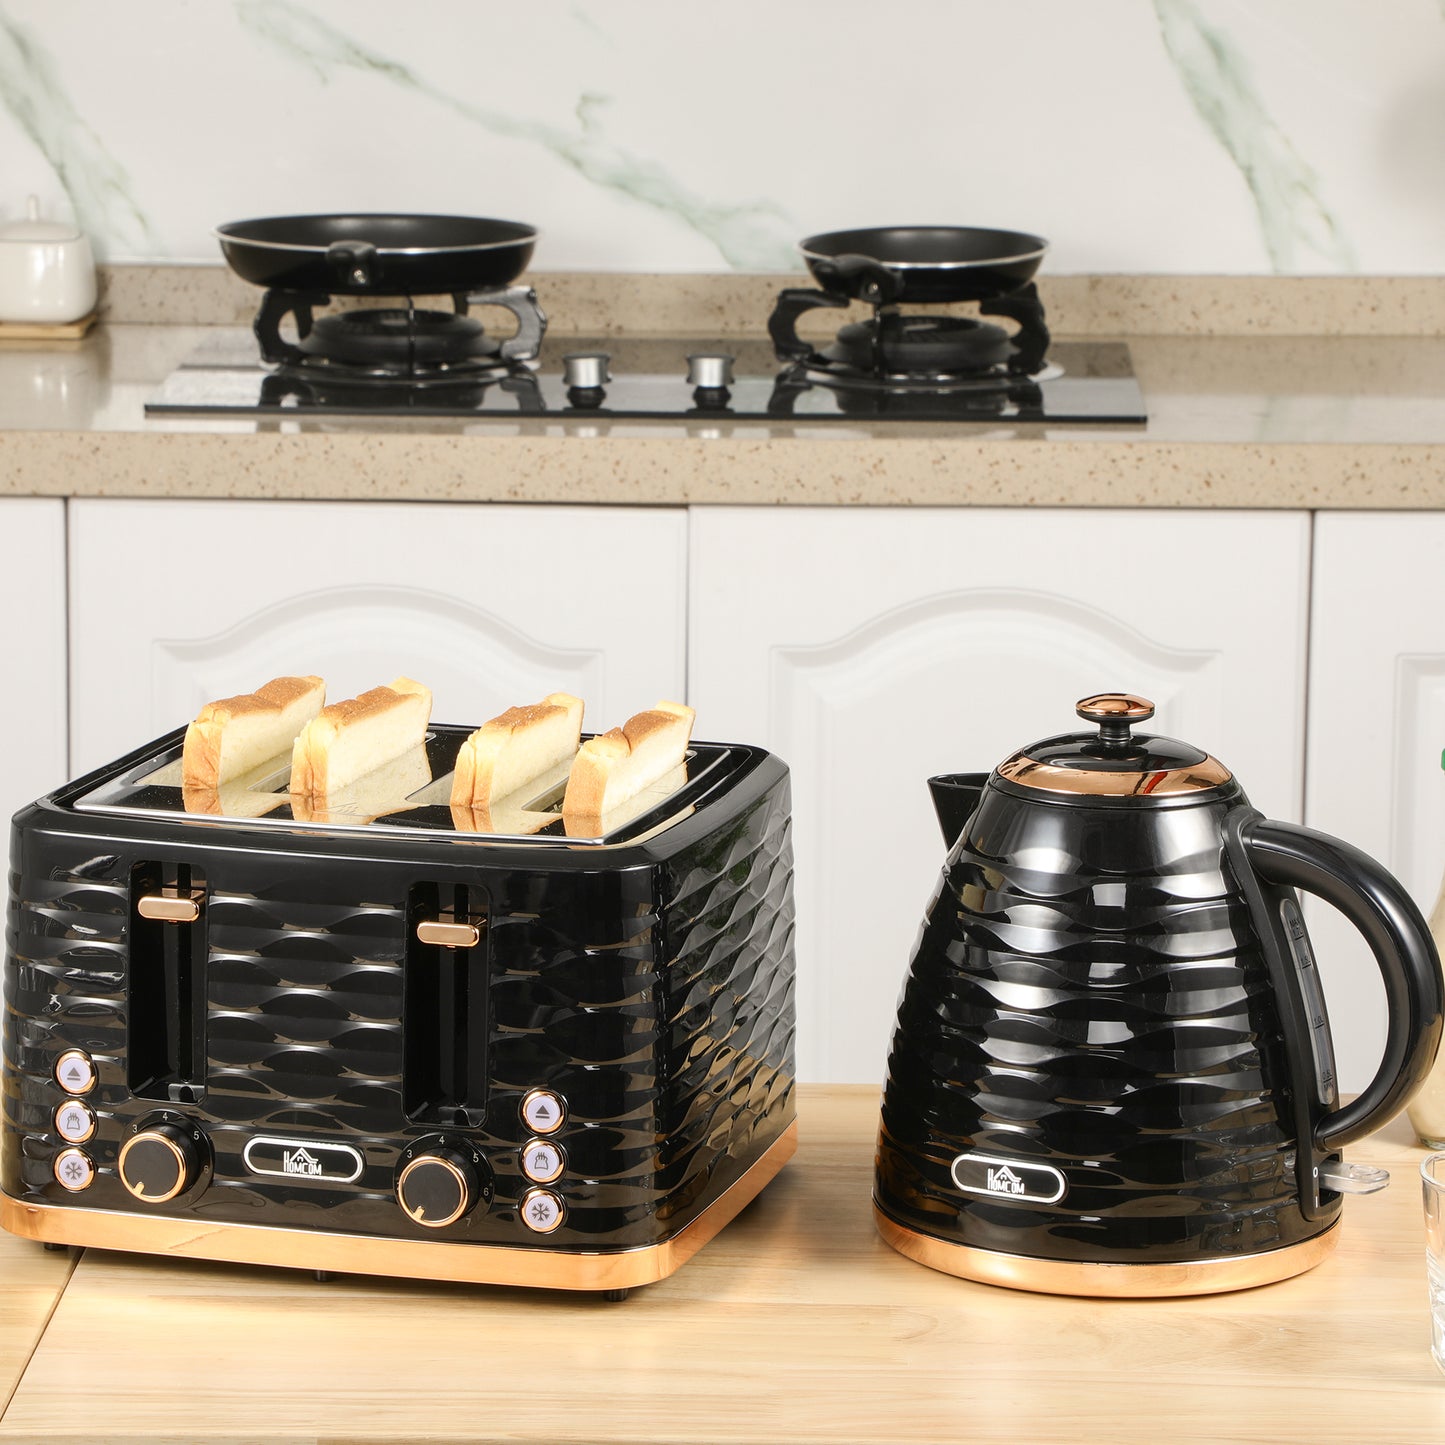 HOMCOM Kettle and Toaster Sets, 1600W 1.7L Rapid Boil Kettle & 4 Slice Toaster with 7 Browning Controls, Defrost, Reheat and Crumb Tray, Otter thermostat, Black